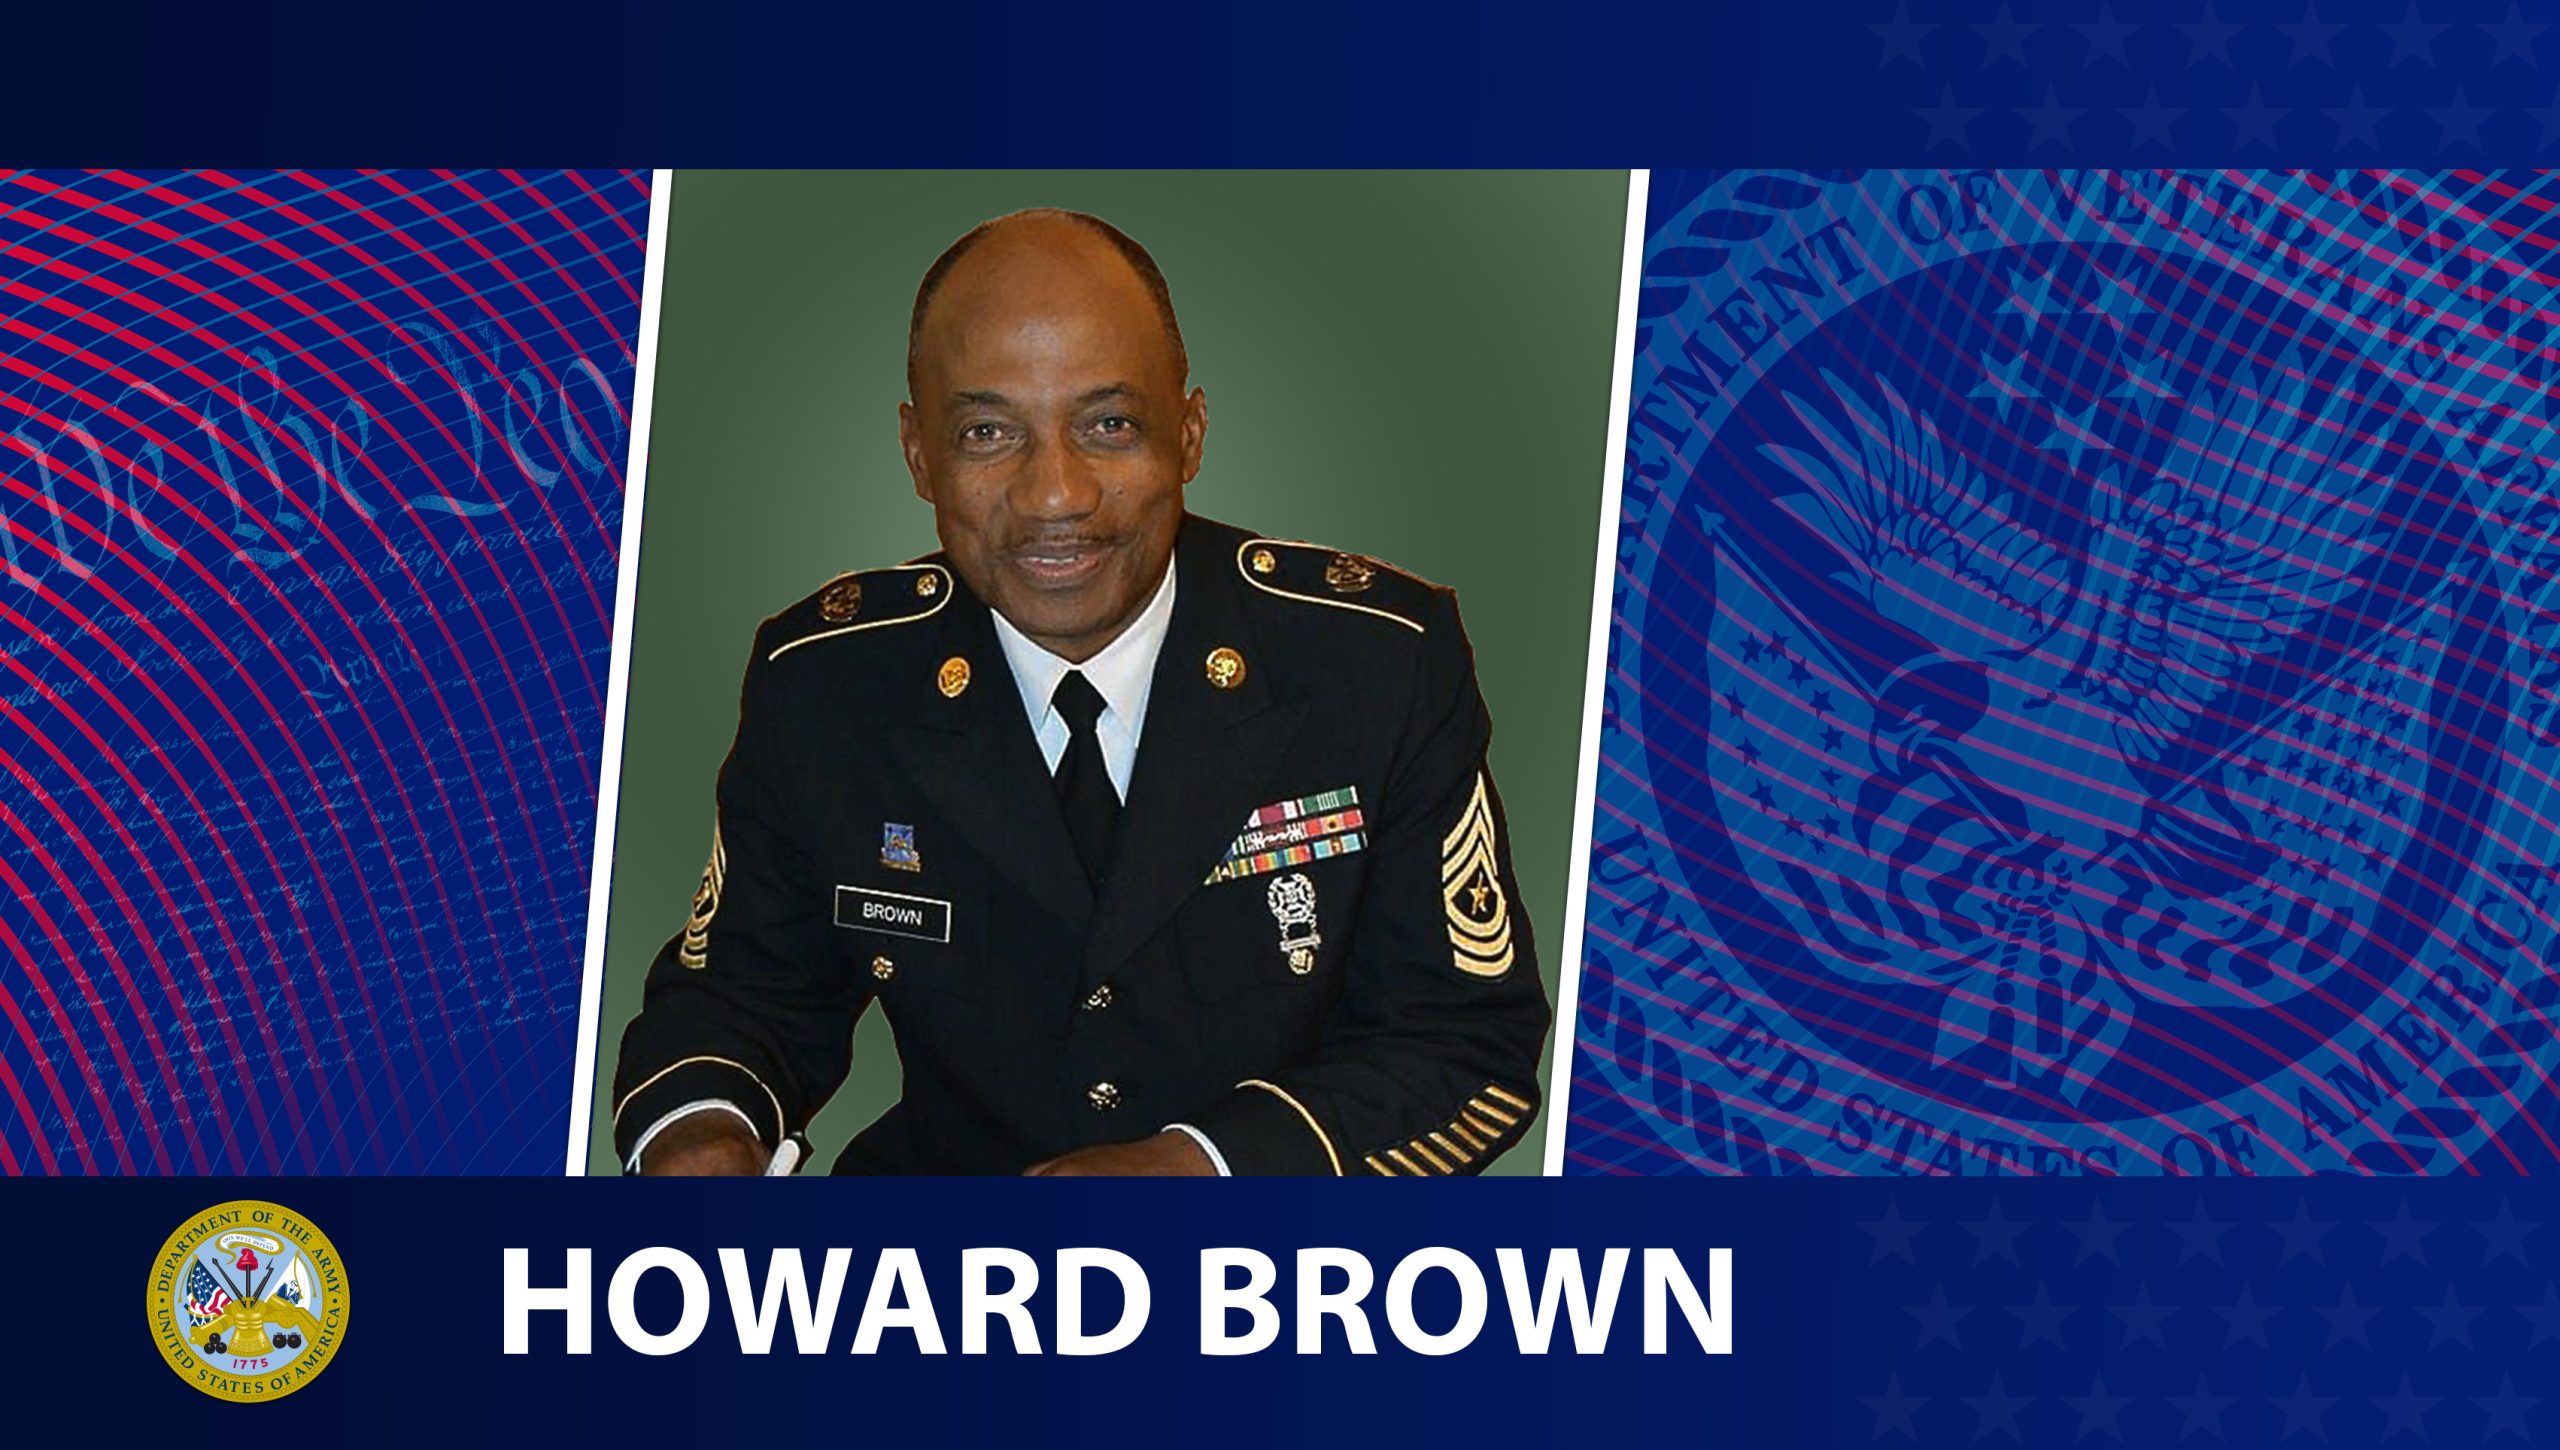 This week’s Honoring Veterans Spotlight honors the service of Army Veteran Howard Brown, who served during the Vietnam War from 1964 to 1969 and the Gulf War from 1969 to 1992.